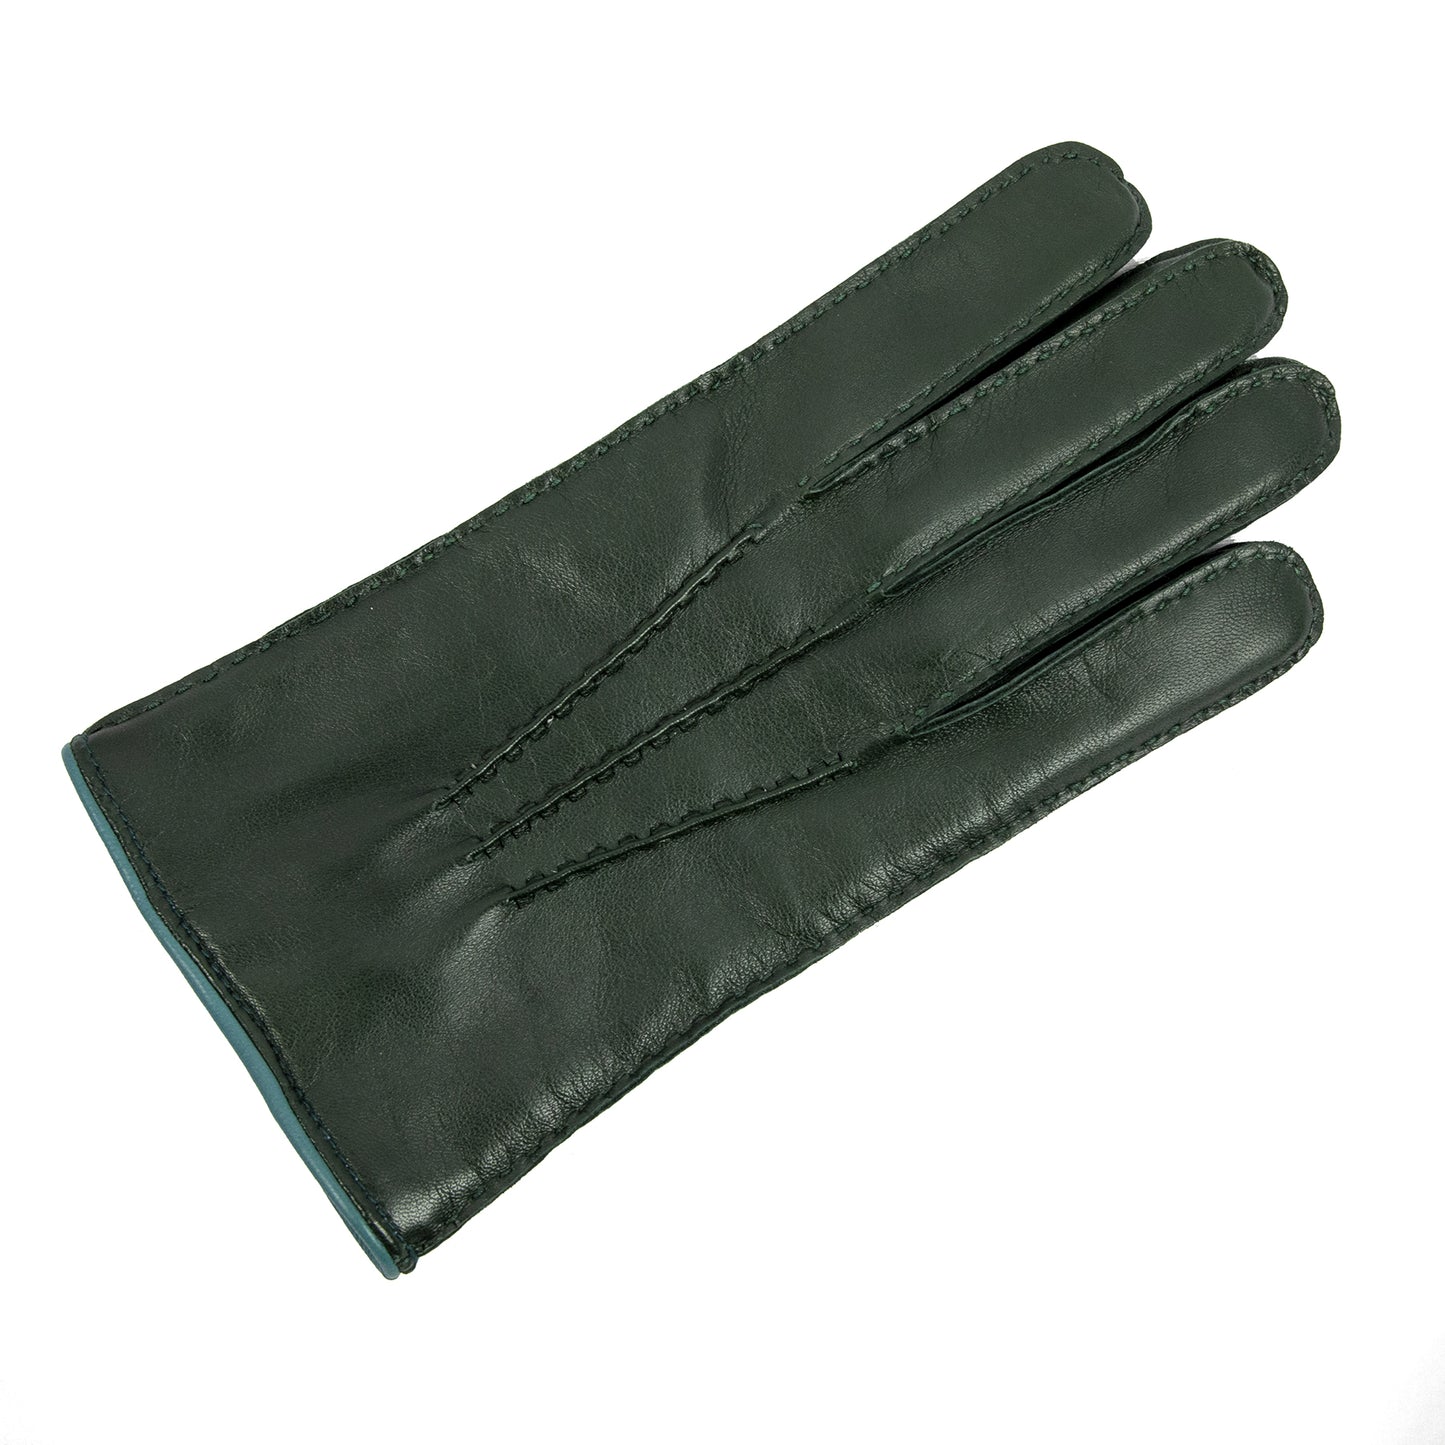 Men's fully hand-stitched green nappa leather gloves and cashmere lining